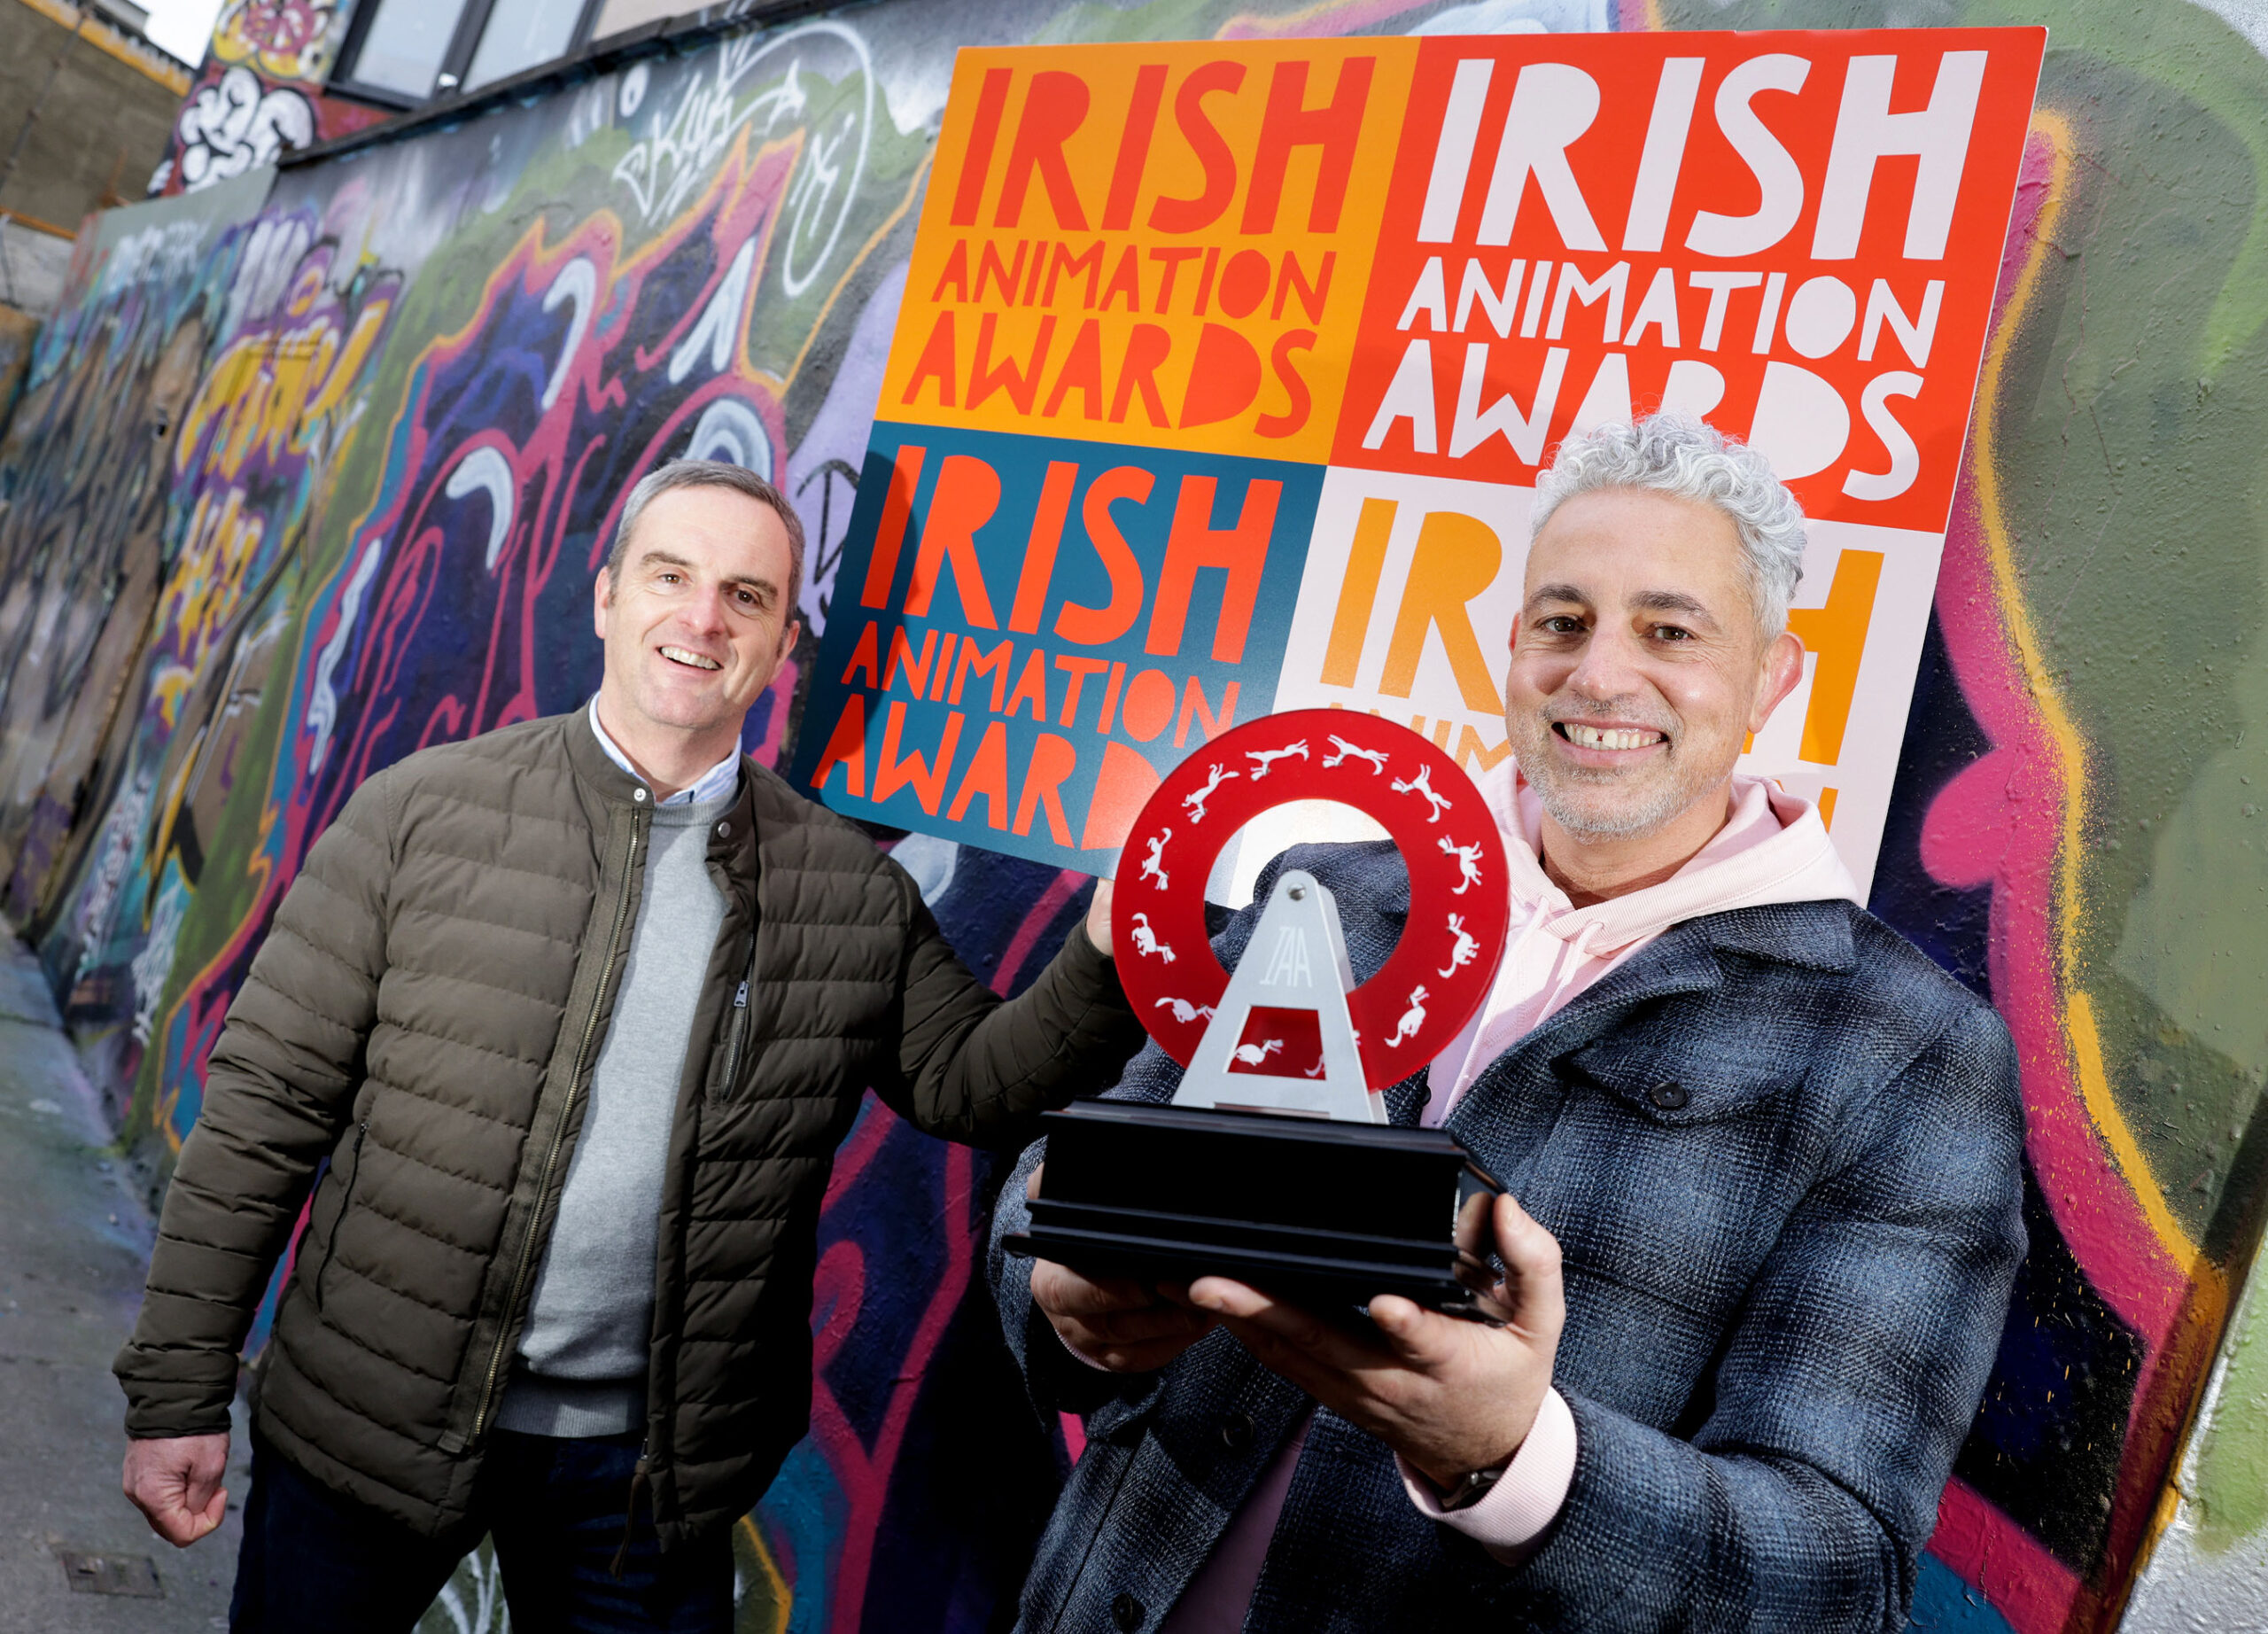 Baz Ashmawy and Ronan McCabe at the launch of the Irish Animation Awards